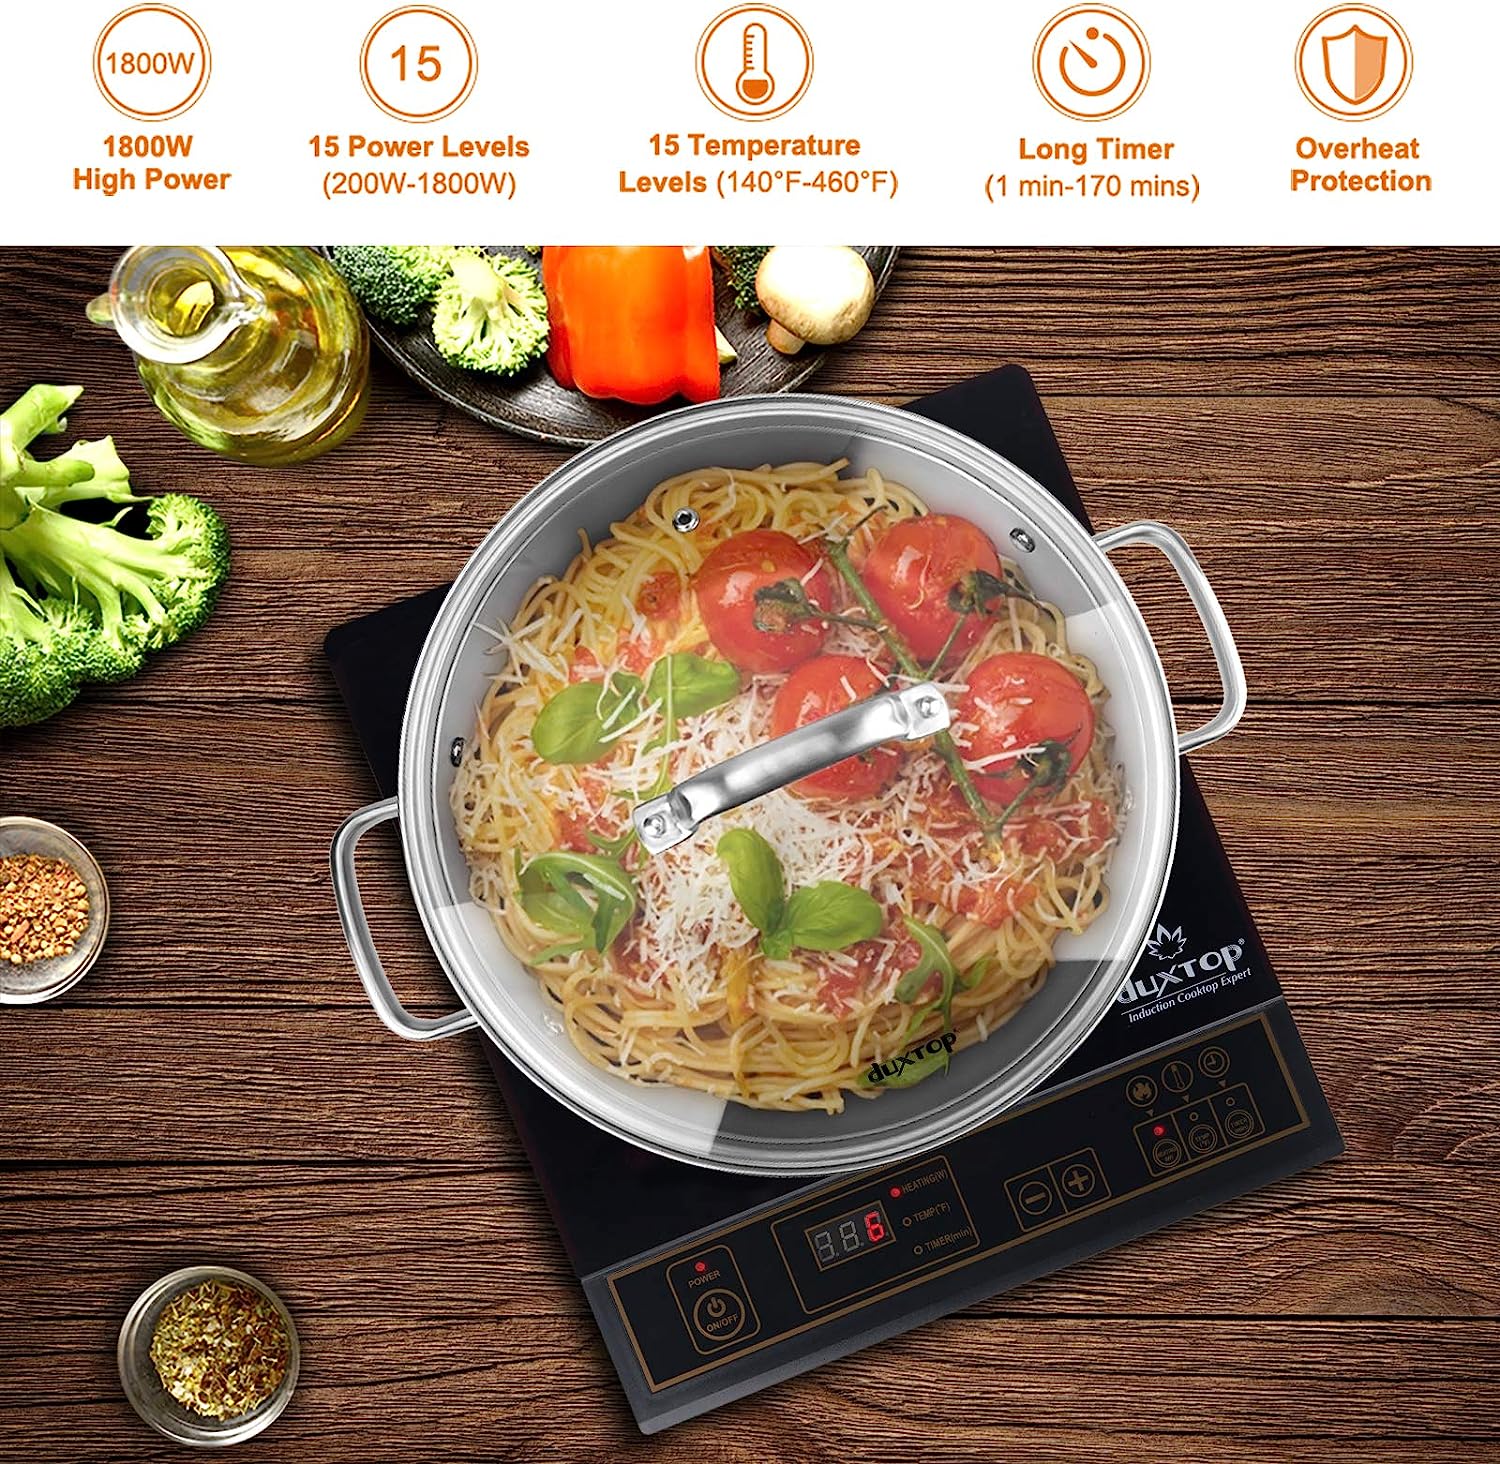 Stainless Steel Induction Cooktop - Home Professional - 1800W